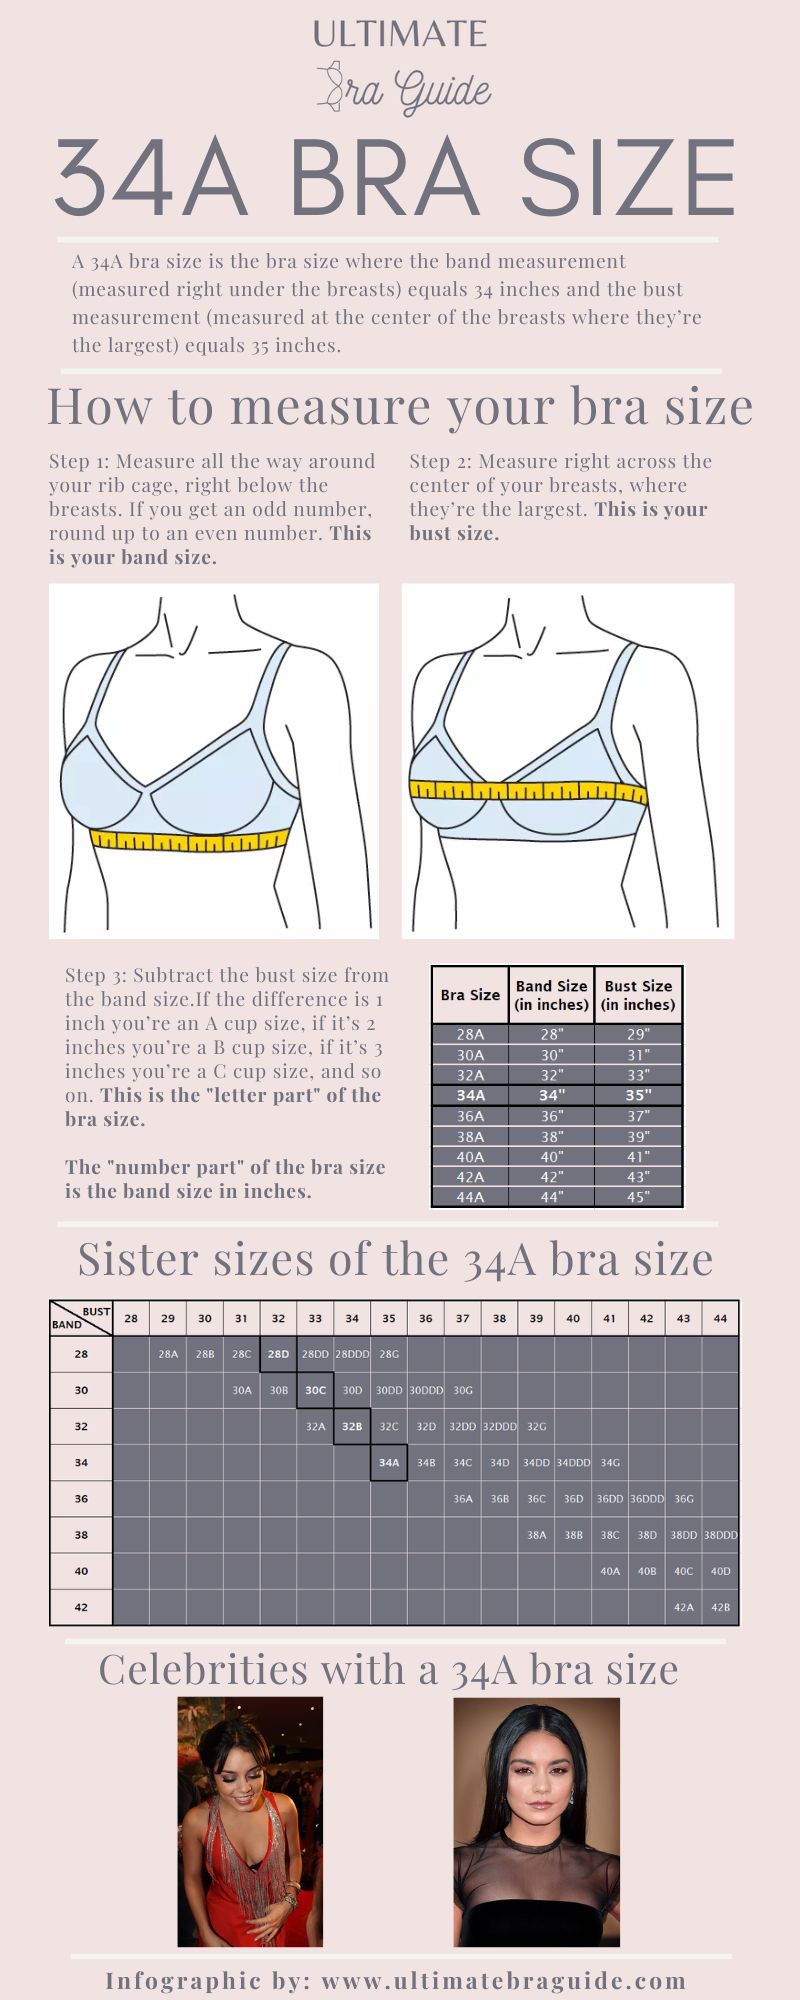 An infographic all about the 34A bra size - what it is, how to measure if you're 34A bra size, 34A bra sister sizes, 34A cup examples, and so on